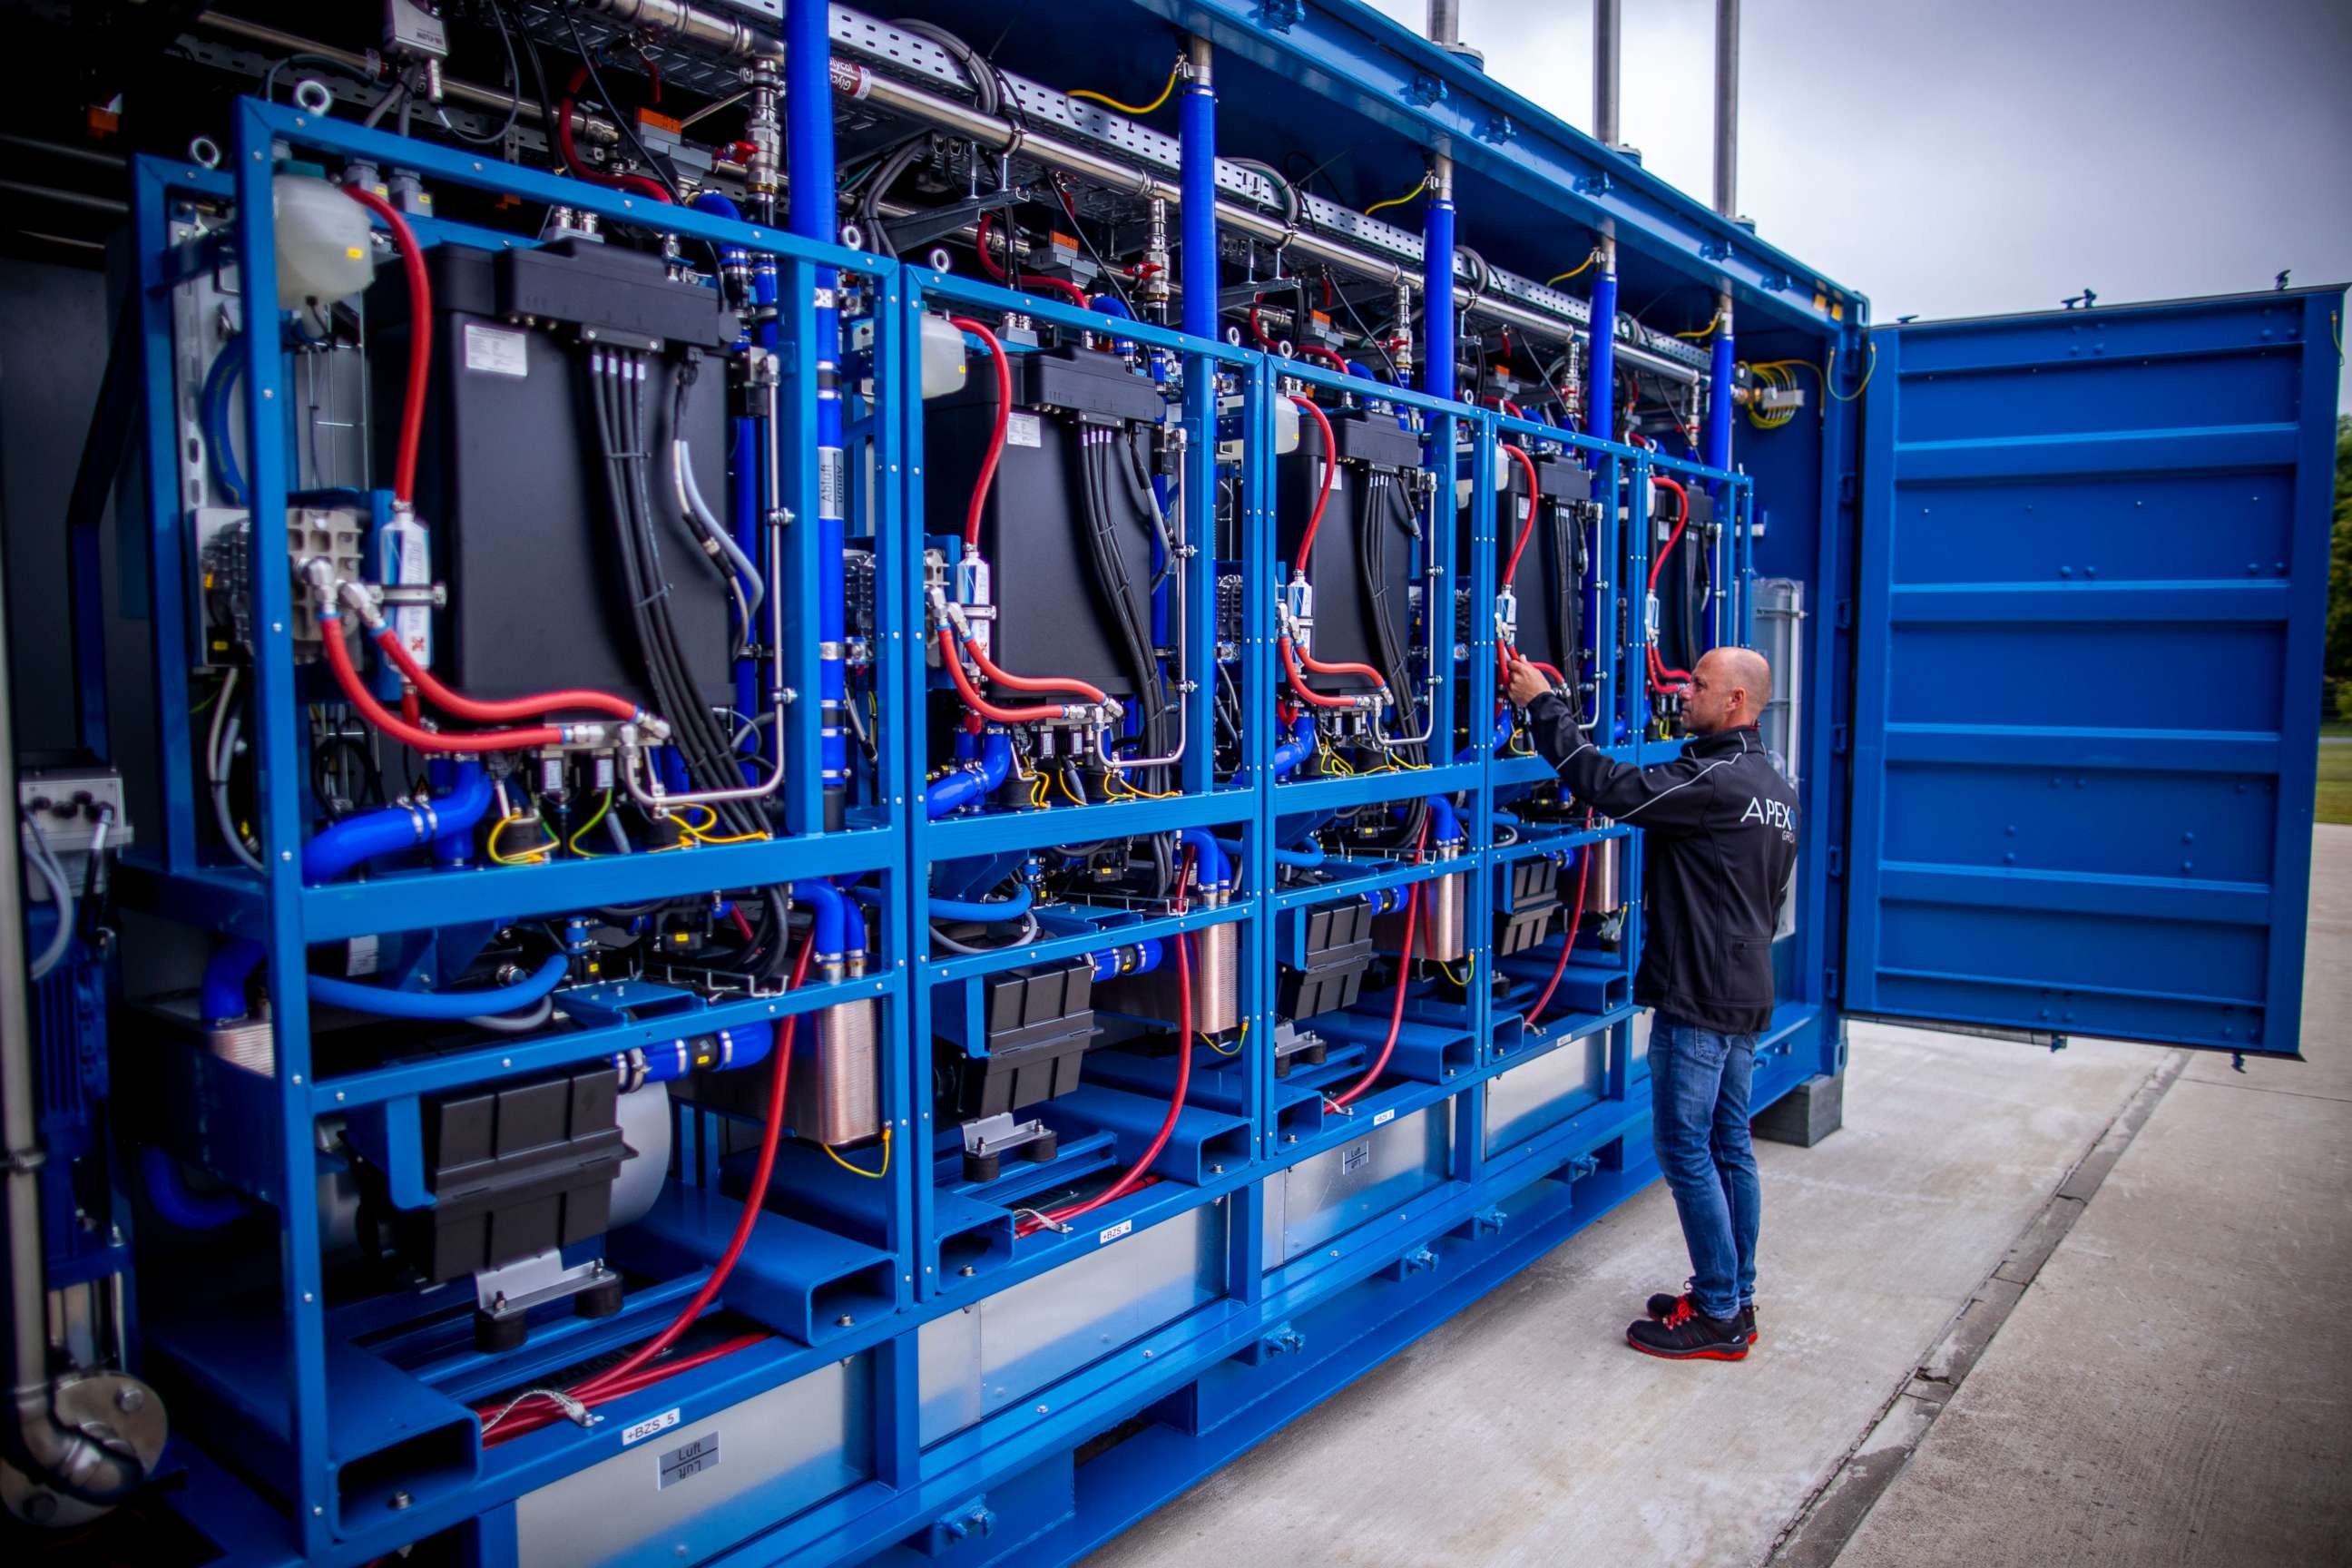 PHOTO: Plant manager Guido Konig from Apex Energy tests the fuel cell in what the company says is the largest grid-connected hydrogen power plant in Europe, in Laage, Germany, June 12, 2020.